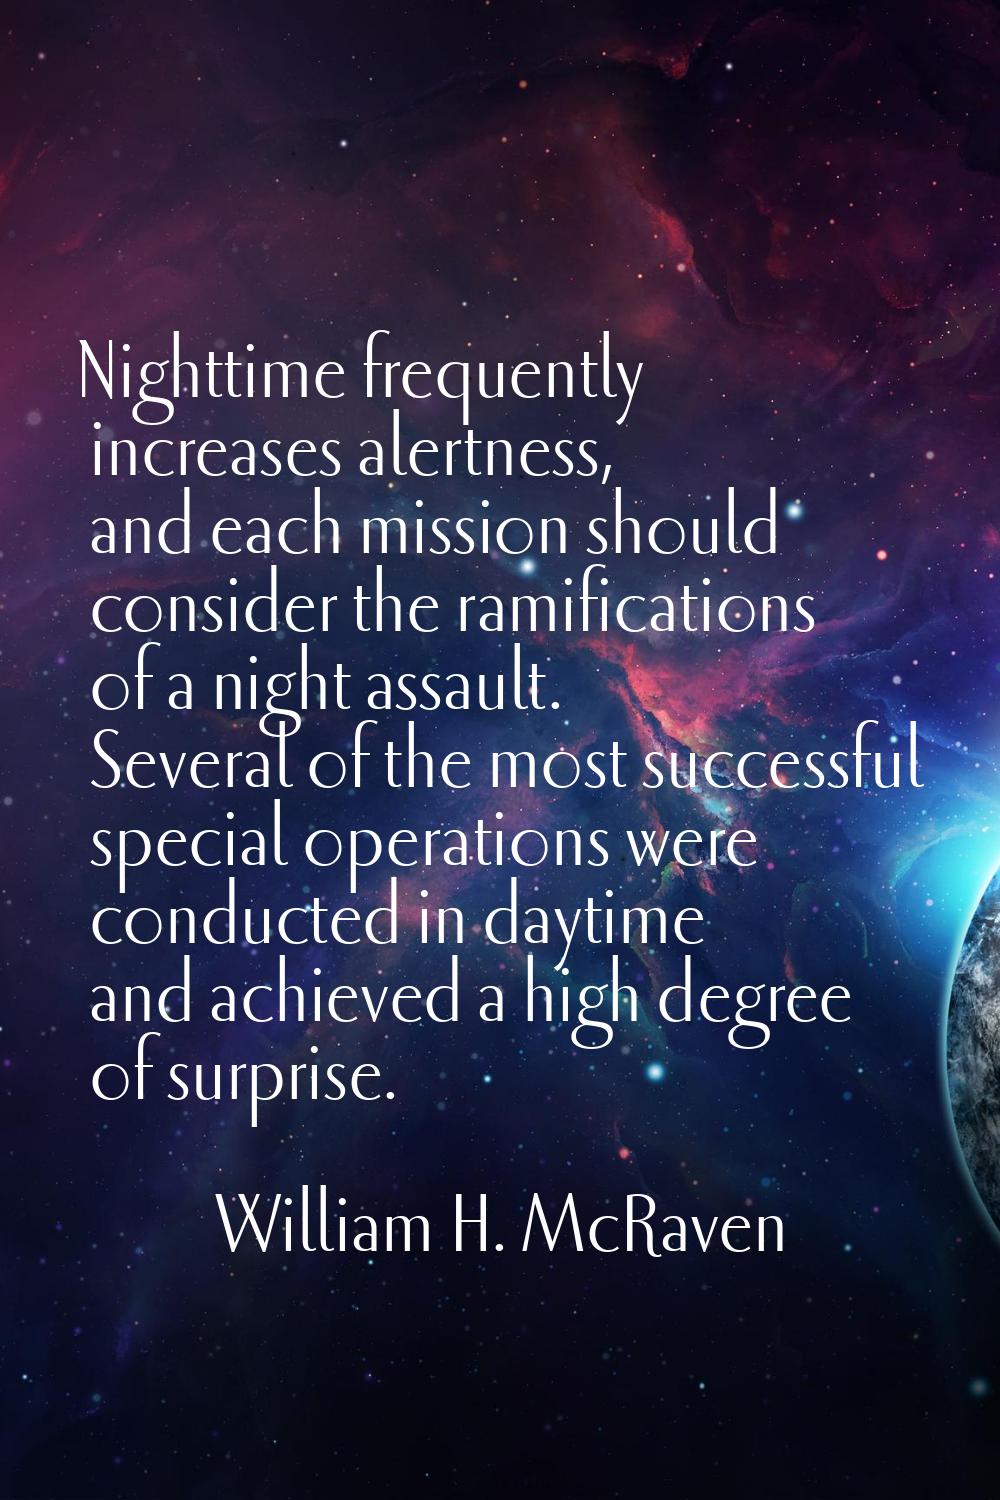 Nighttime frequently increases alertness, and each mission should consider the ramifications of a n